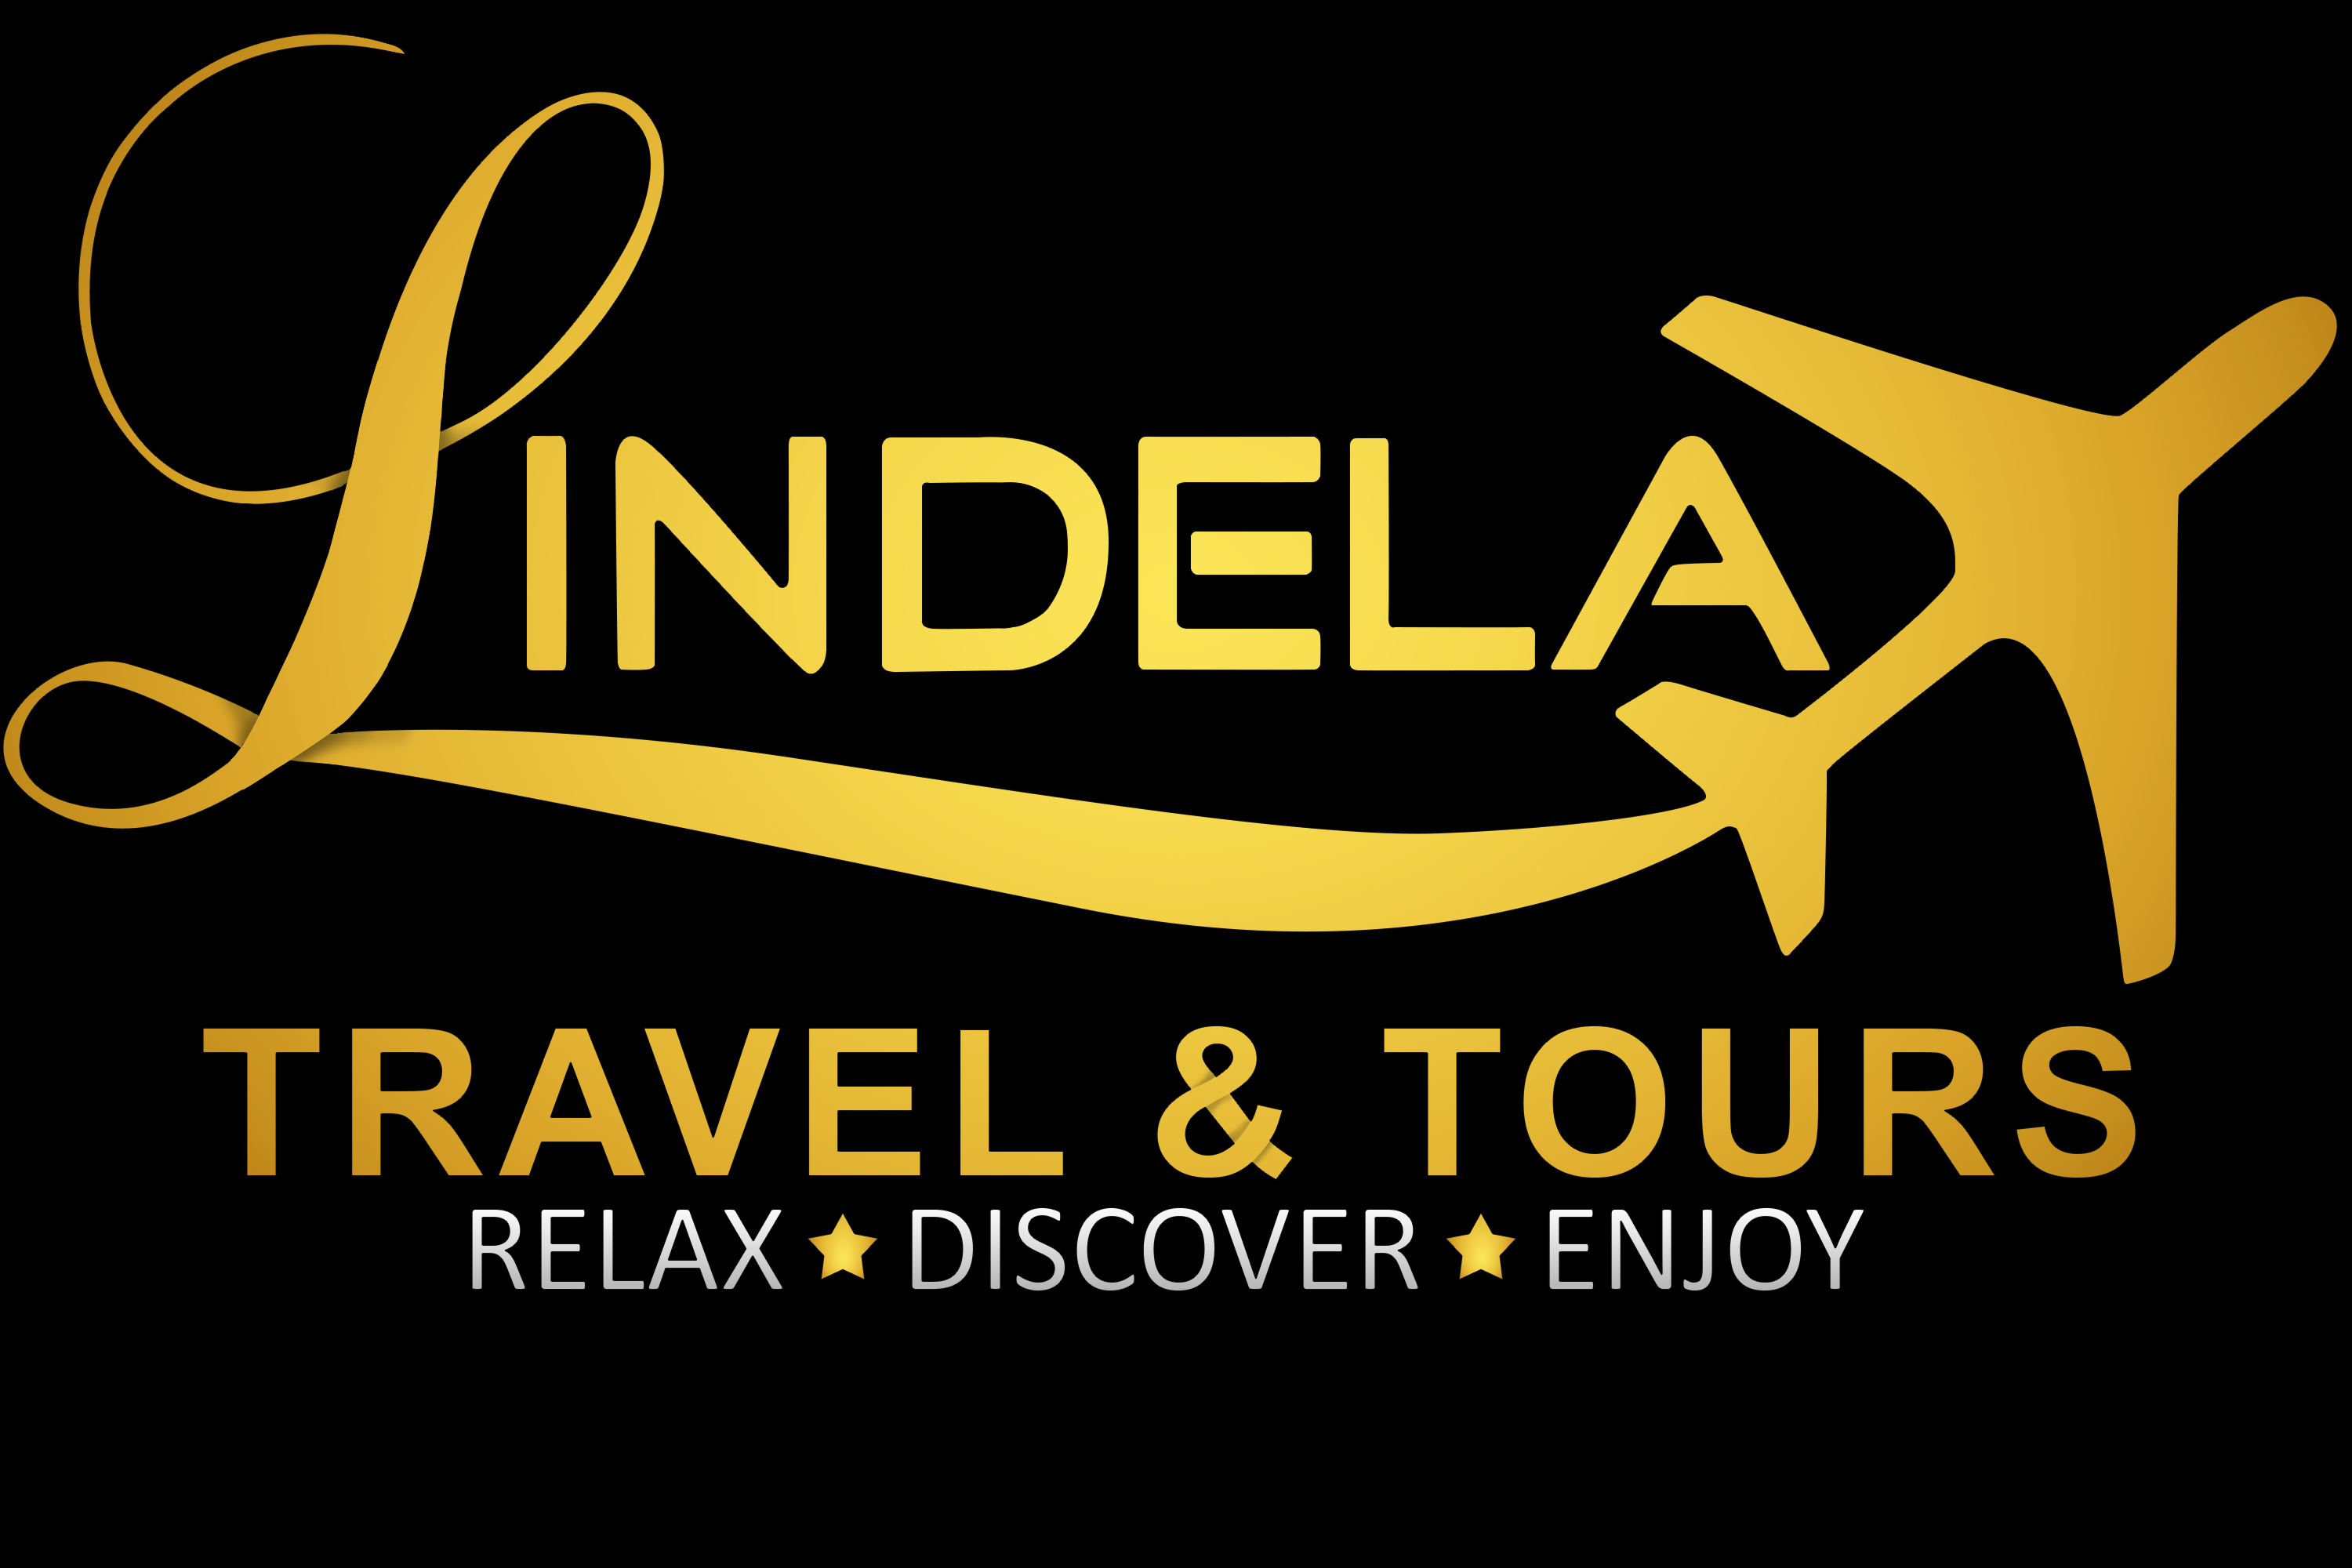 Lindela Travel and Tours - Israel Chamber of Commerce of the Philippines